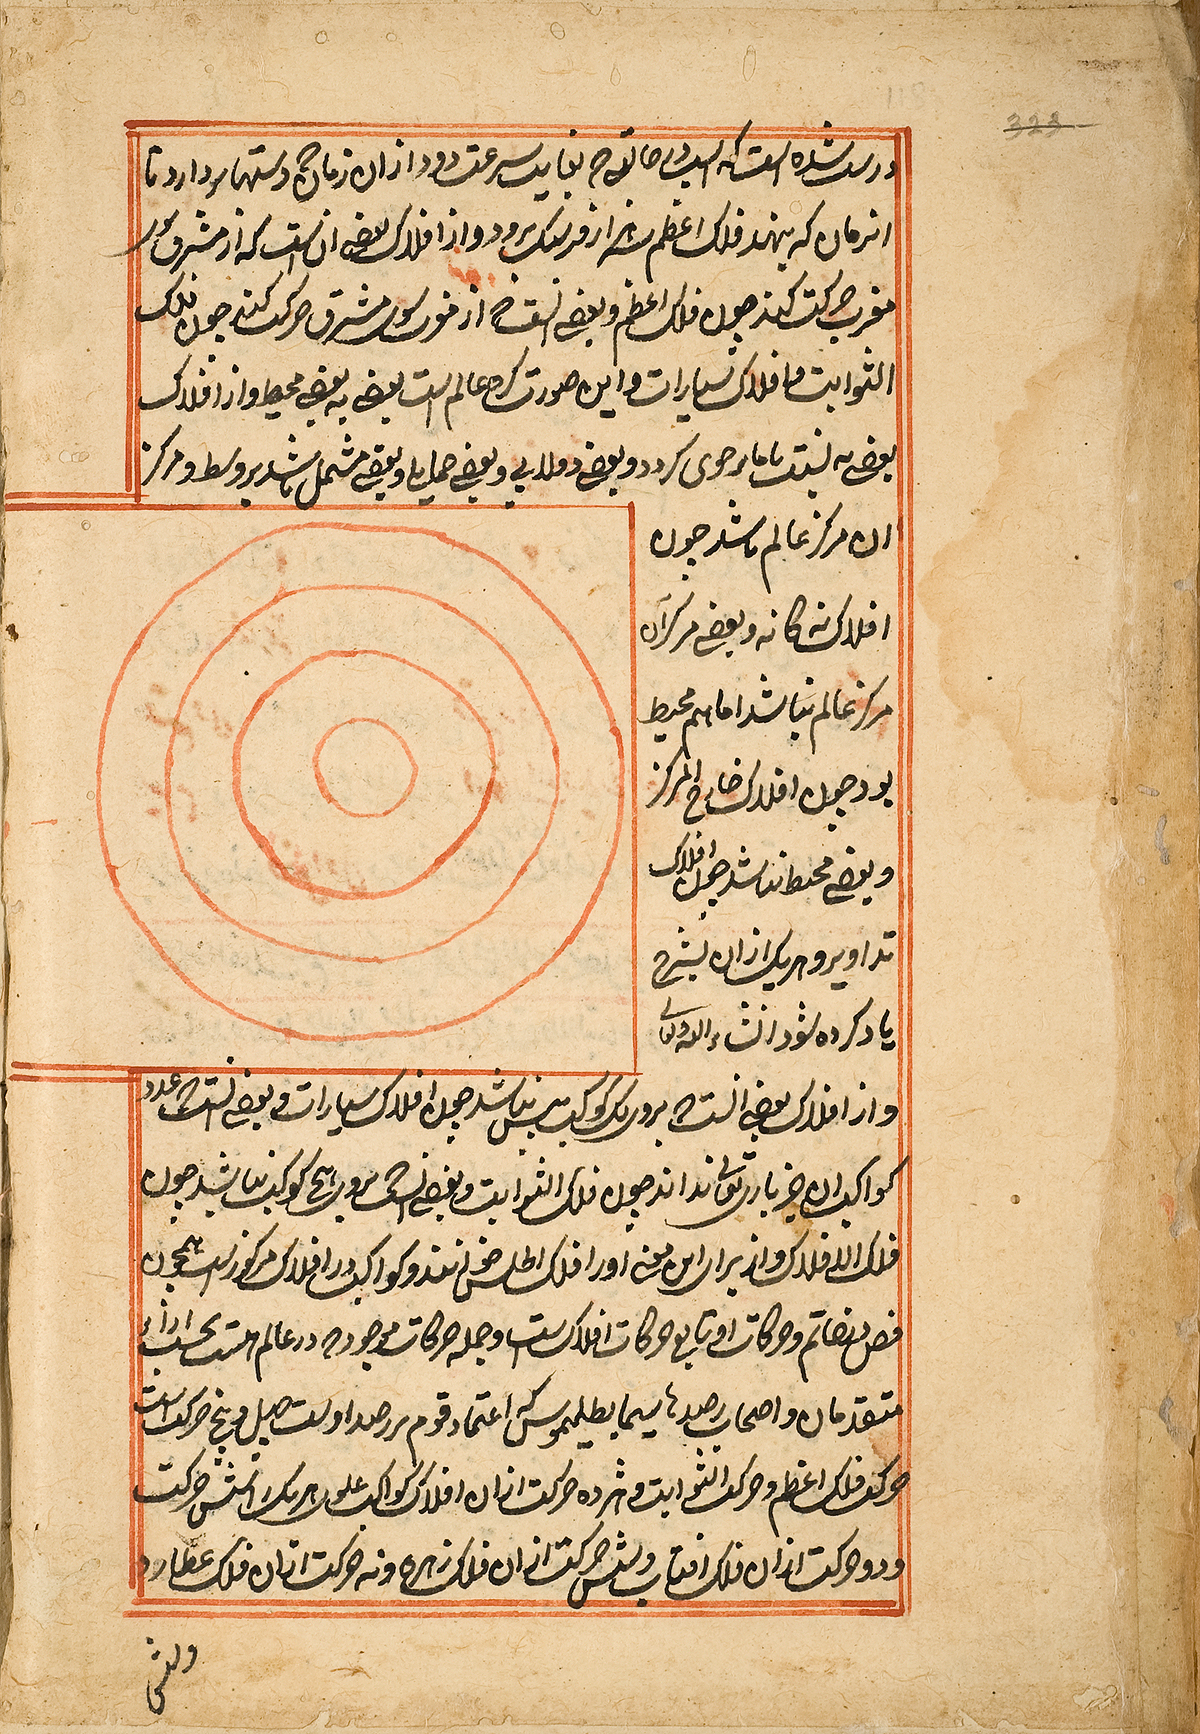 A conceptual diagram of geocentric model of the universe, devised by the Hellenistic scholar Claudius Ptolemy who lived in Alexandria in the second century C.E.  There are nine heavenly spheres surrounding the earth, each containing a celestial body, including the sun, moon, planets, and fixed stars.  The figure is surrounded by Persian text and a red double ruled border.